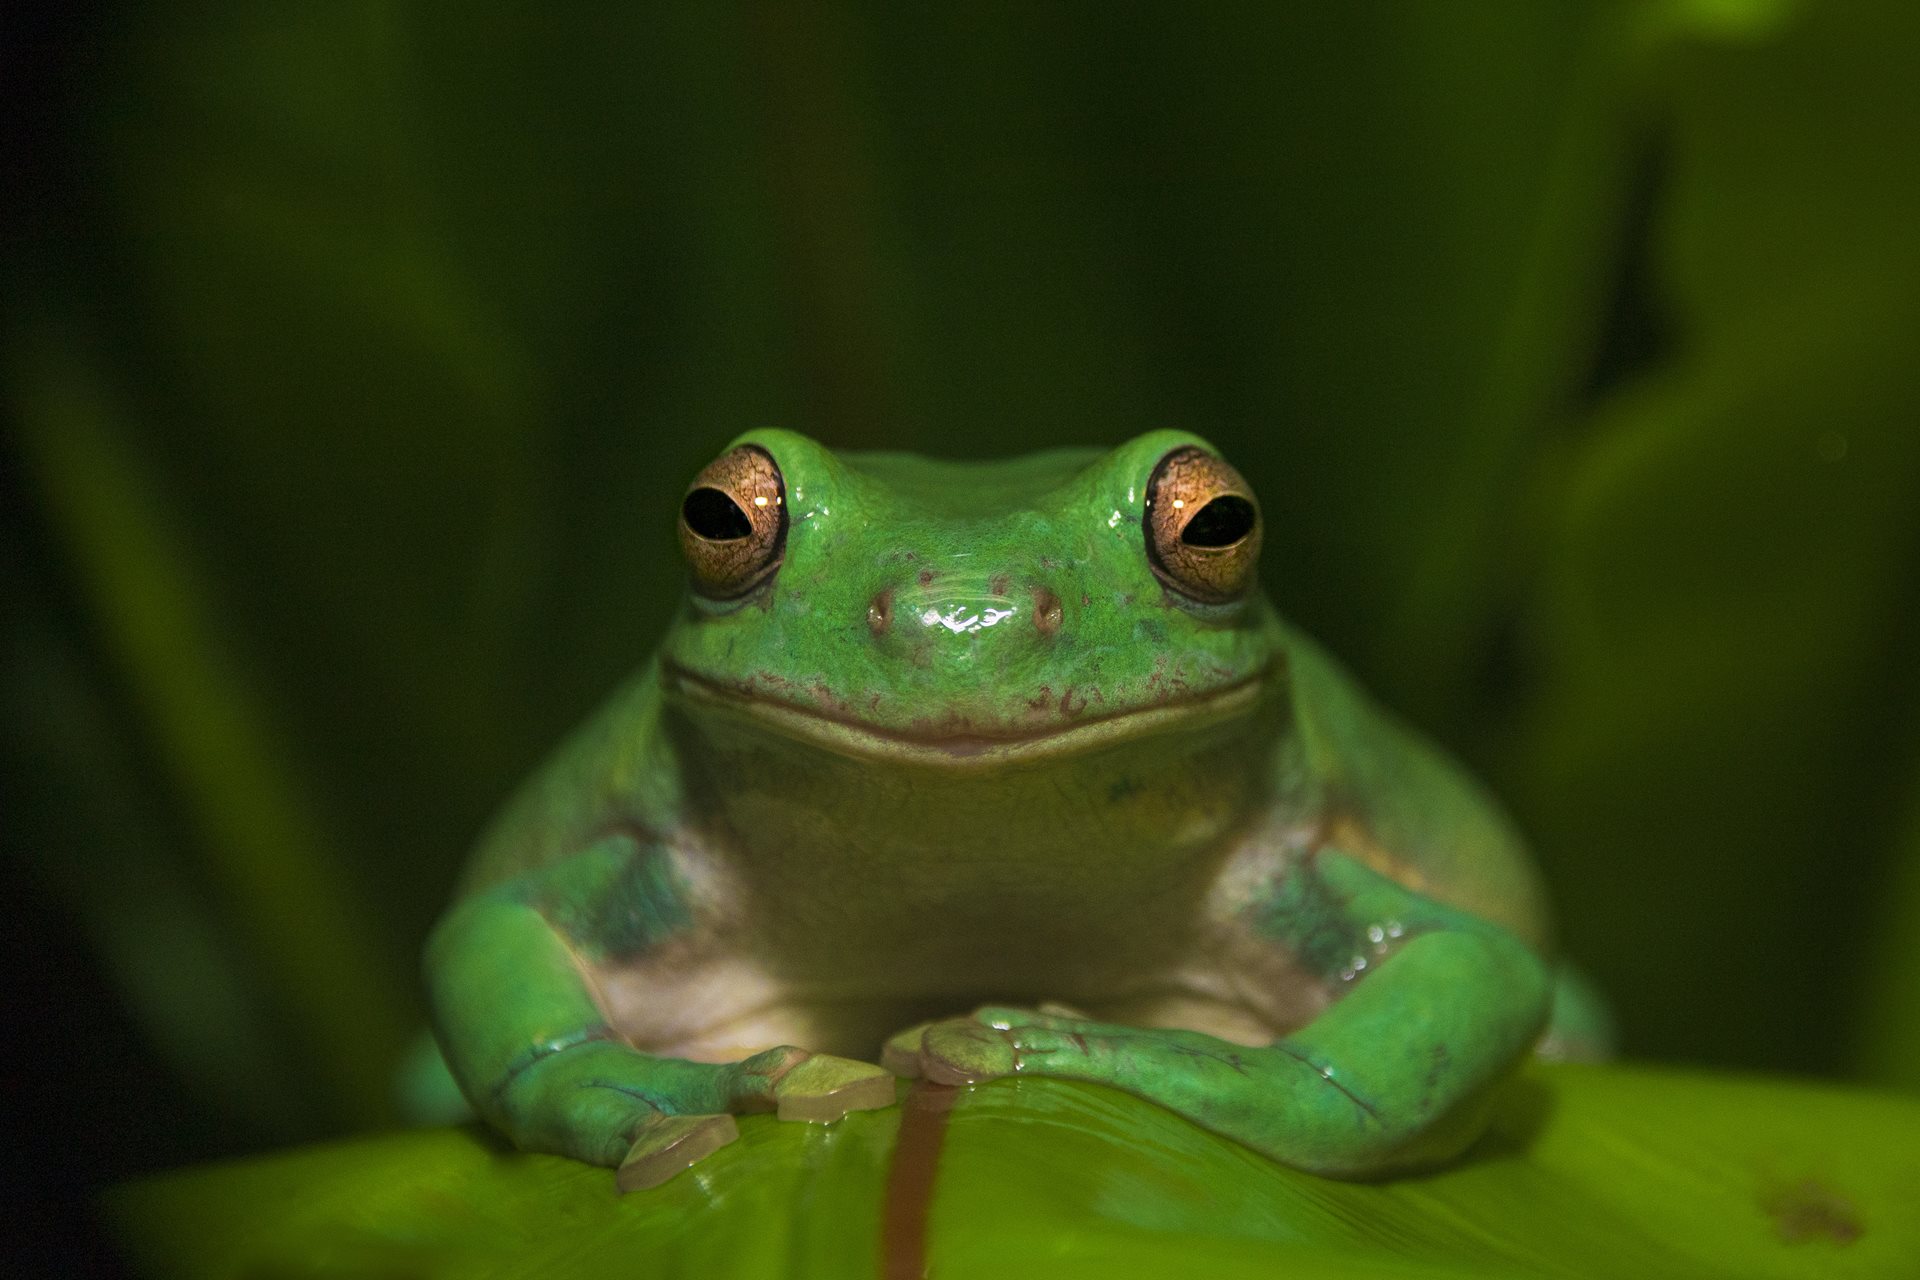 Close up photograph of green frog.